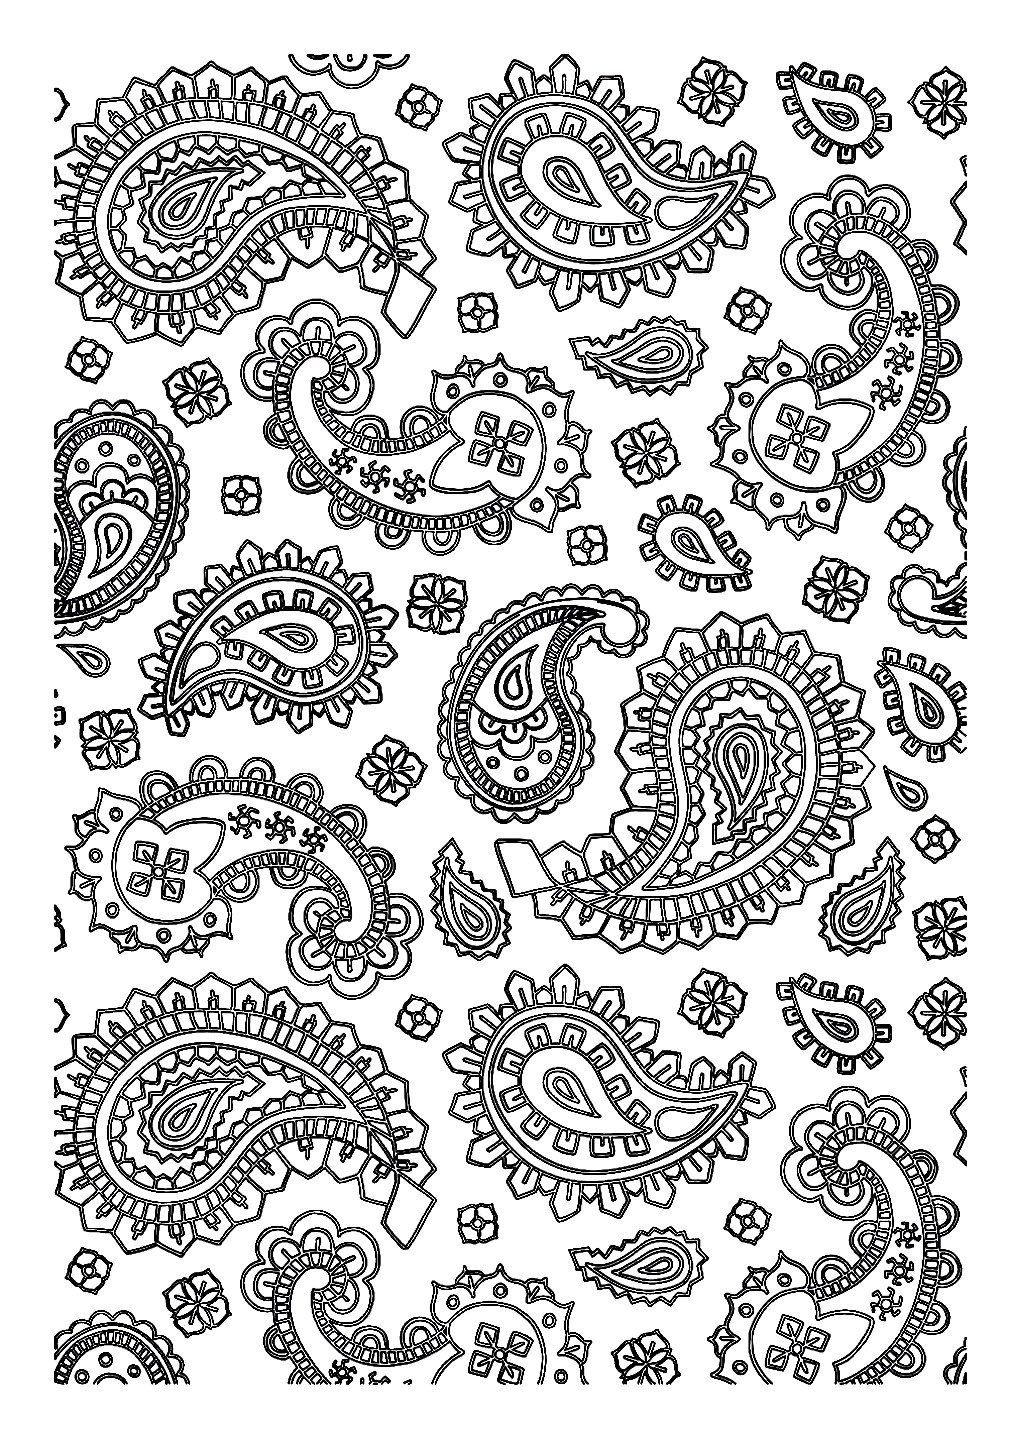 Paisley Printable Coloring Pages
 Paisley Coloring Pages for Adults